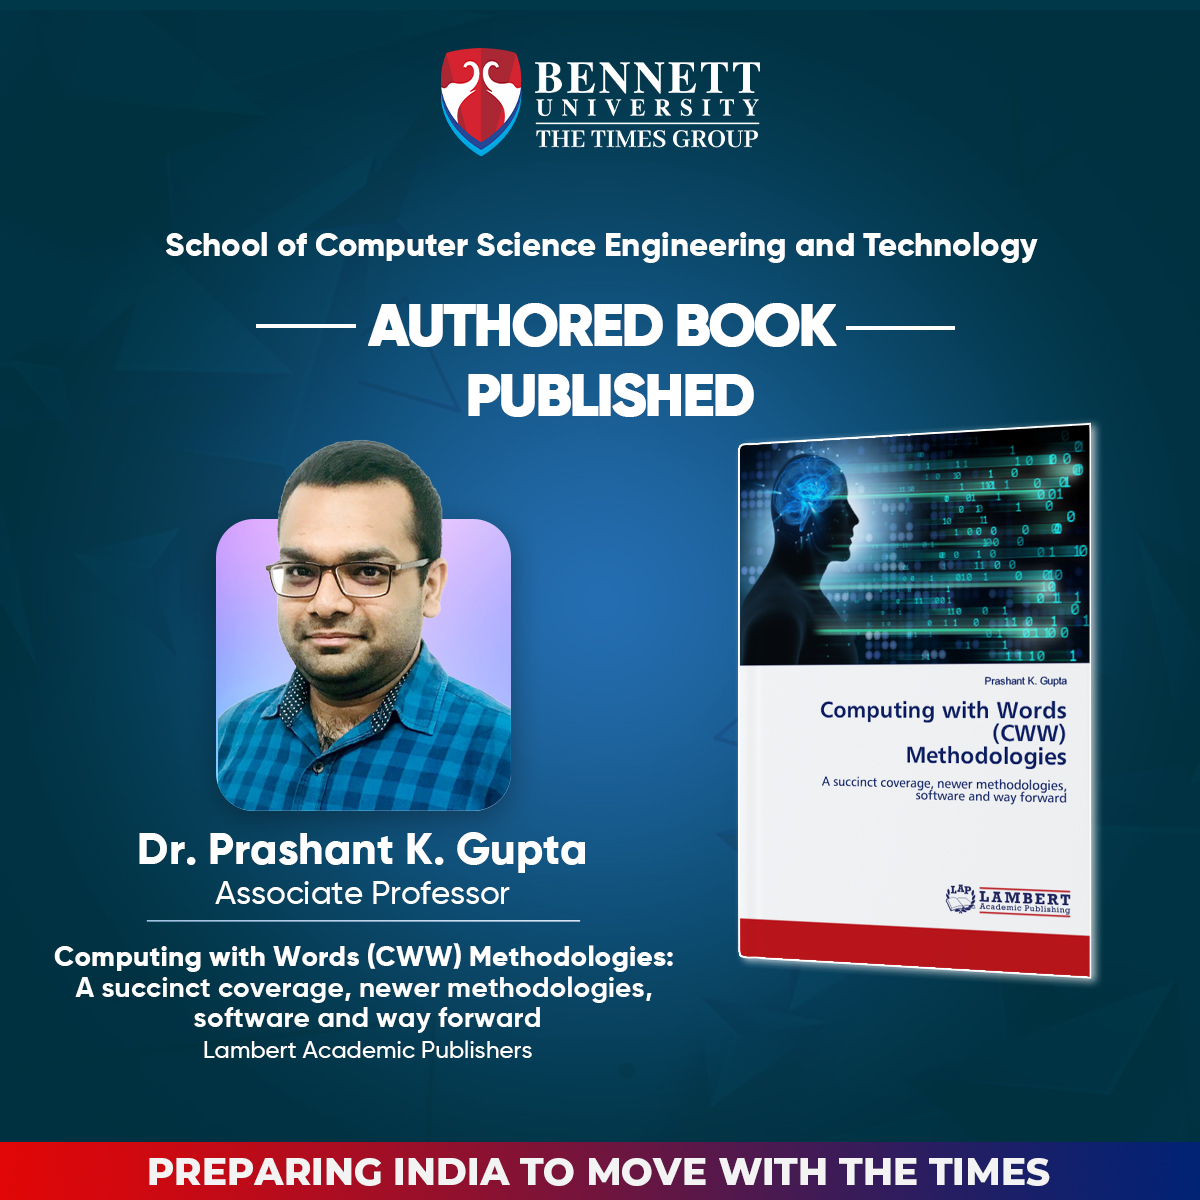 Congratulations, to Dr. Prashant K. Gupta (Associate Professor #scsetbennett) for publishing the book as an author on, “Computing with Words (CWW) Methodologies: A succinct coverage, newer methodologies, software and way forward“, published by Lambert Academic.
#bennettuniversity